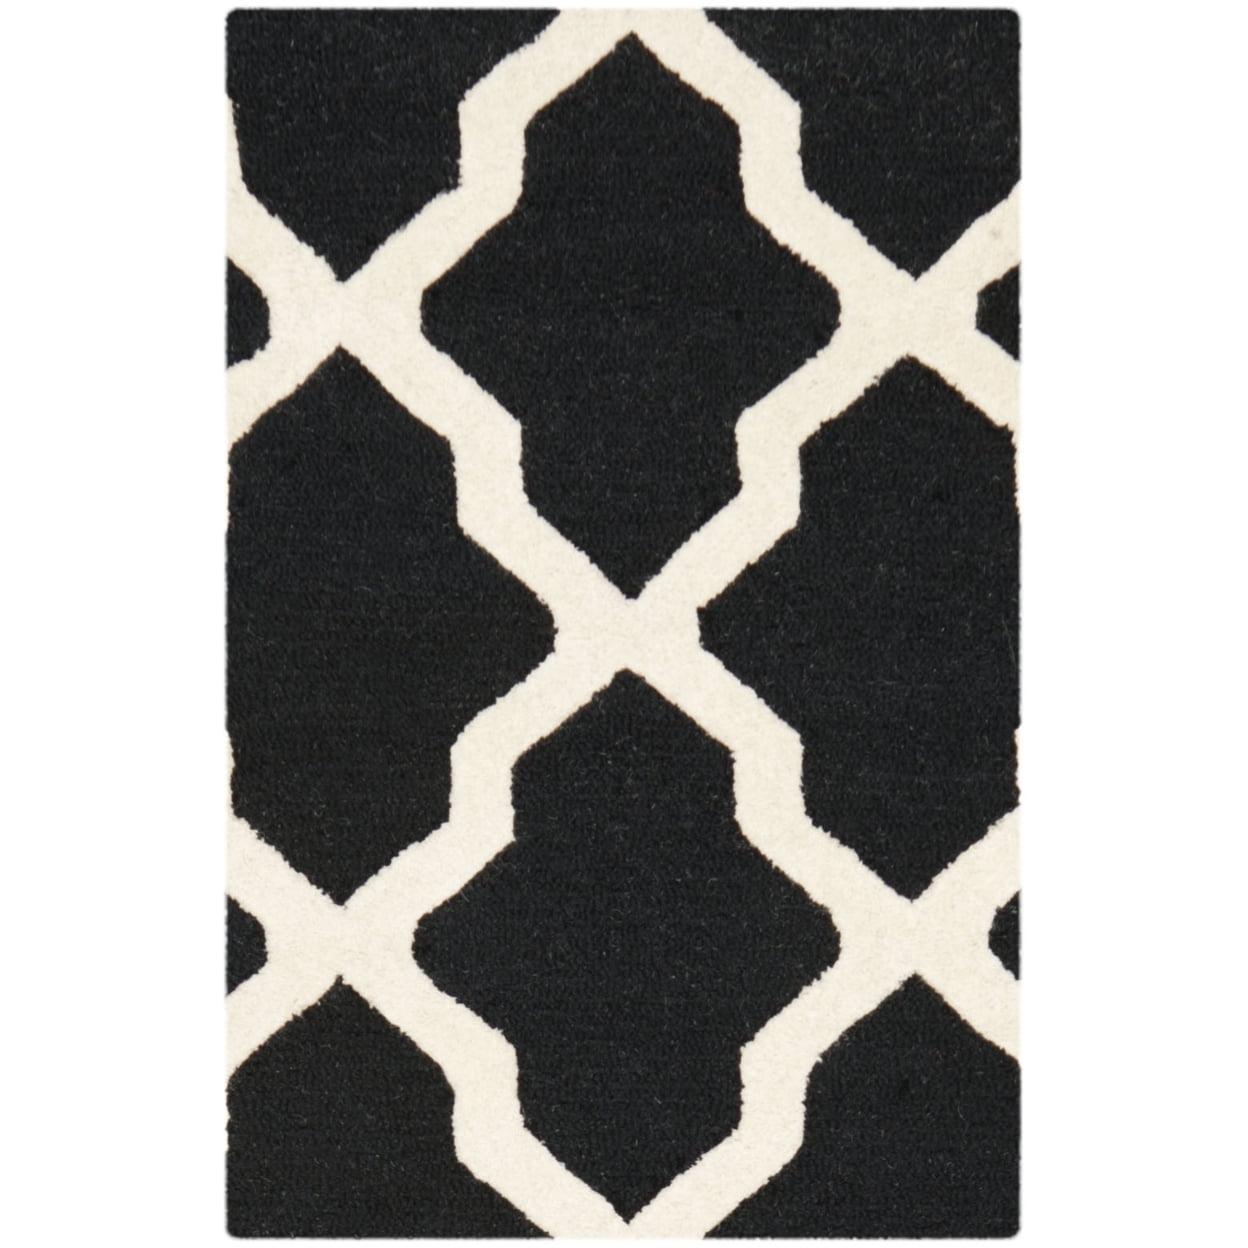 Cambridge Hand-Tufted Wool Rug in Black & Ivory, 2' x 3'